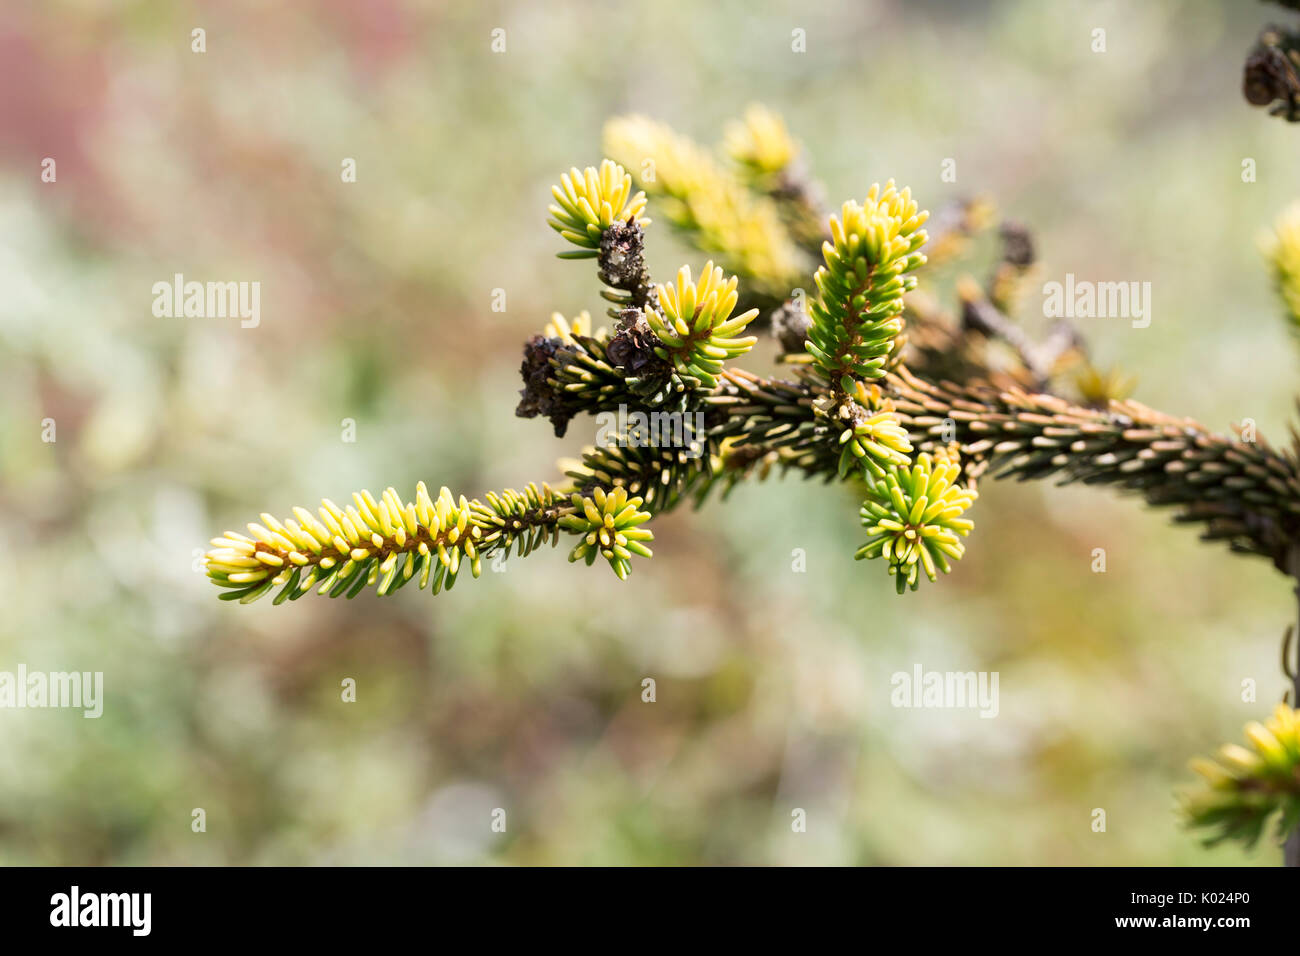 Close up of Golden Oriental Spruce Stock Photo